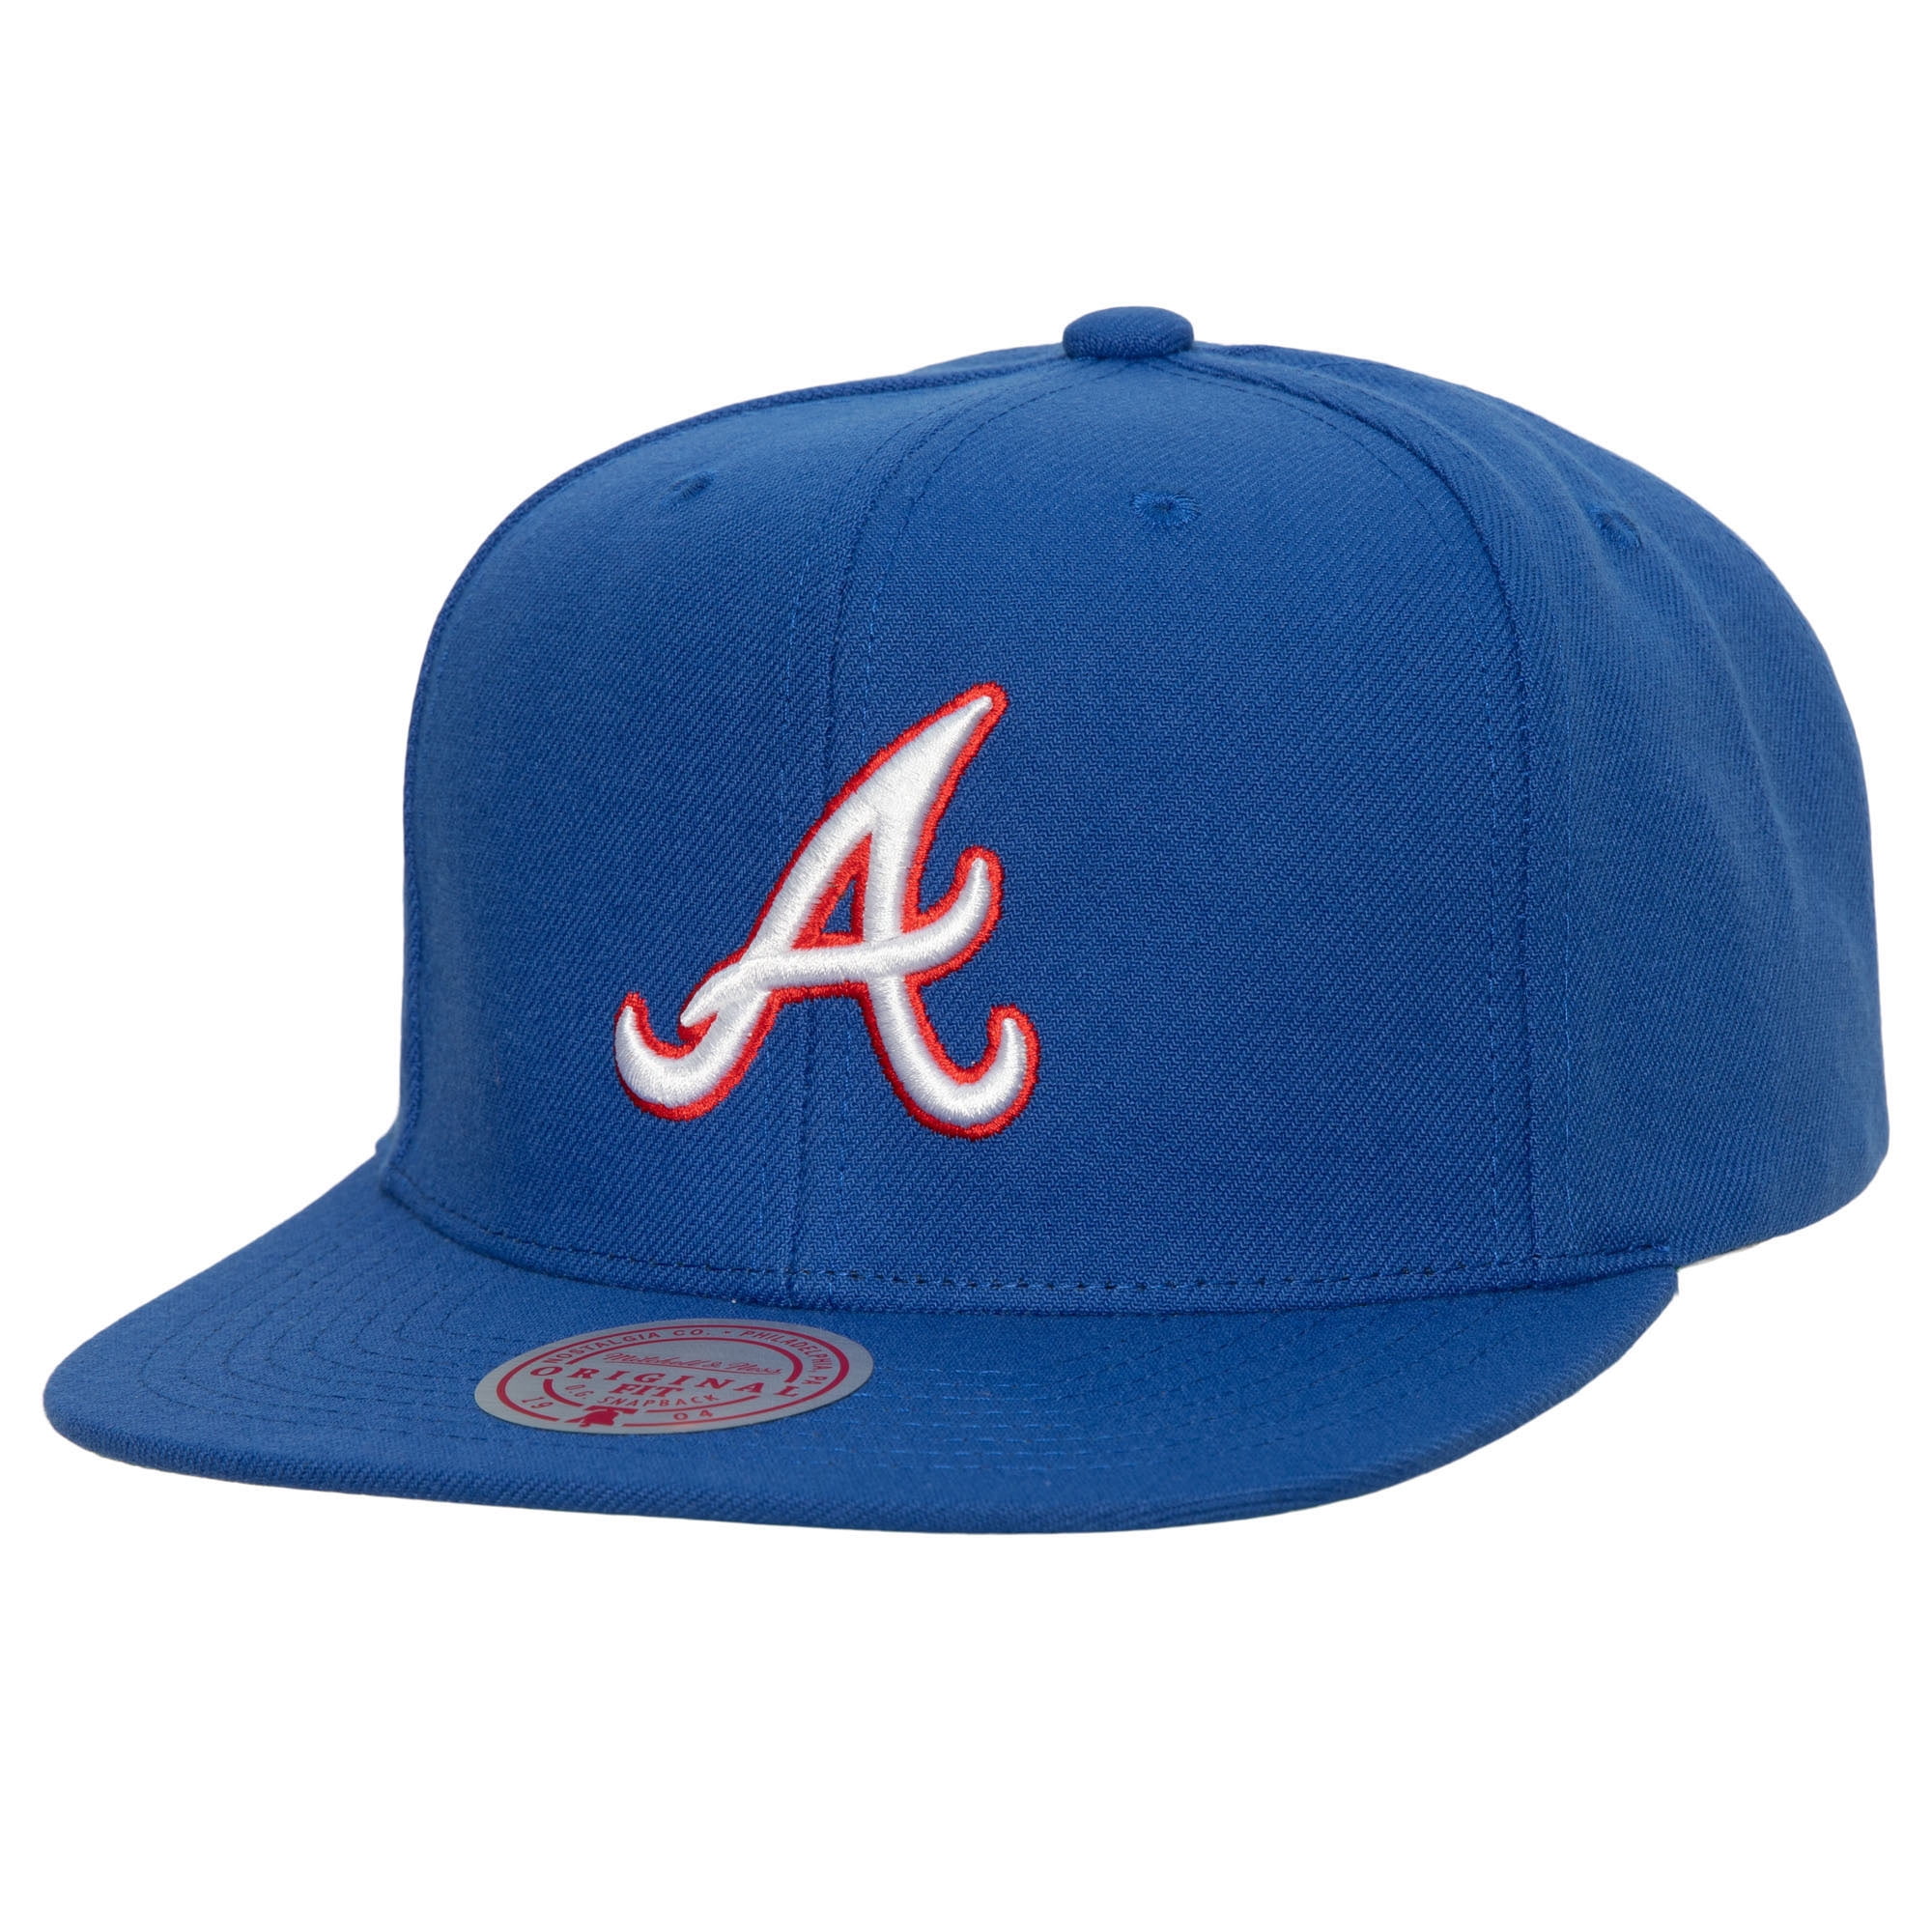 Men's Mitchell & Ness Royal Atlanta Braves Cooperstown Collection Evergreen  Snapback Hat 